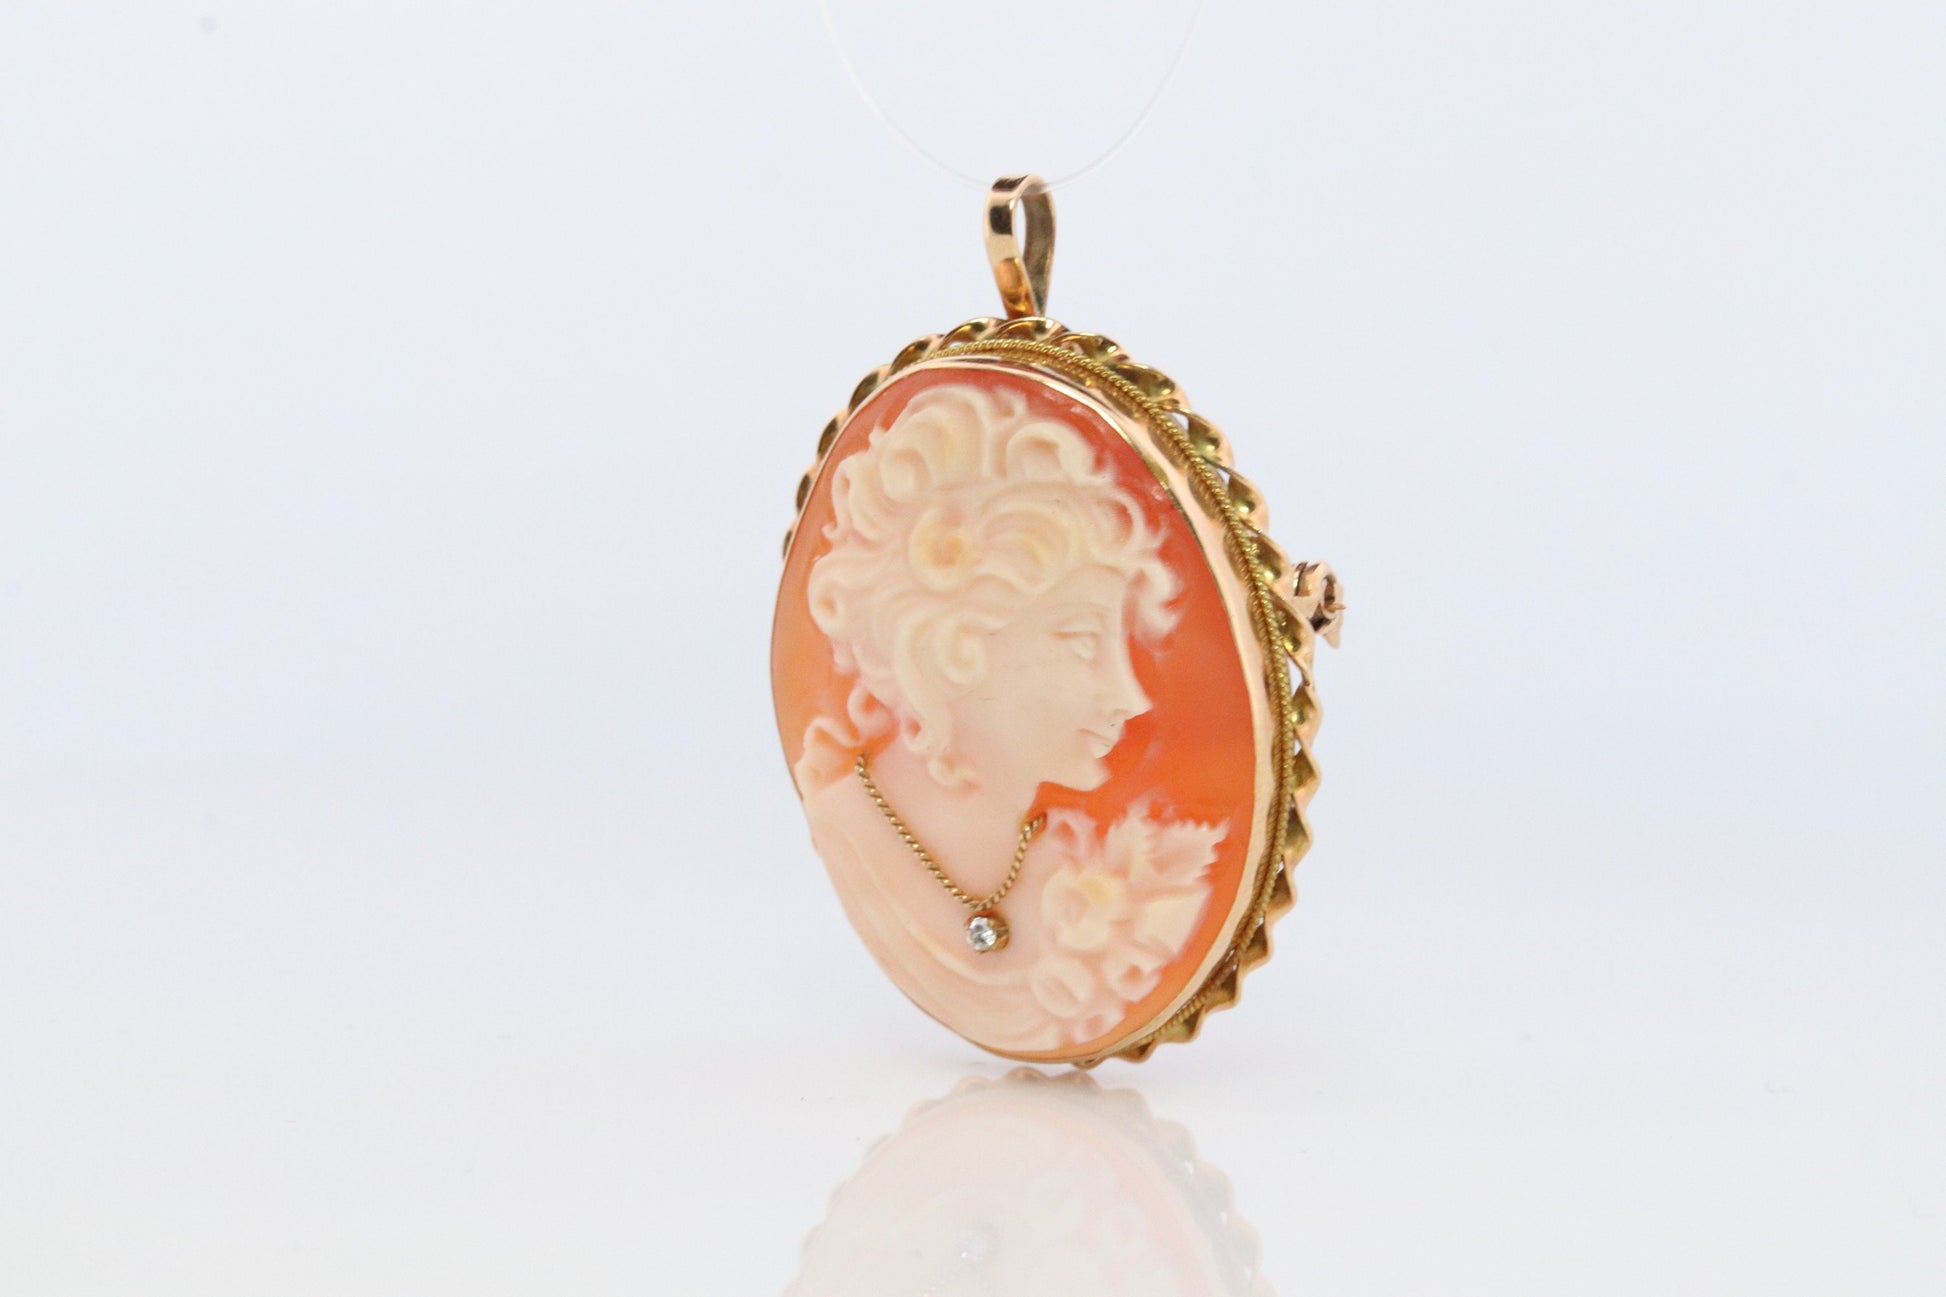 14k Yellow Gold Cameo w/ Diamond, Vintage Filigree Carved Shell Brooch Pin or Pendant. Carved Cameo Shell Pendant and Brooch.